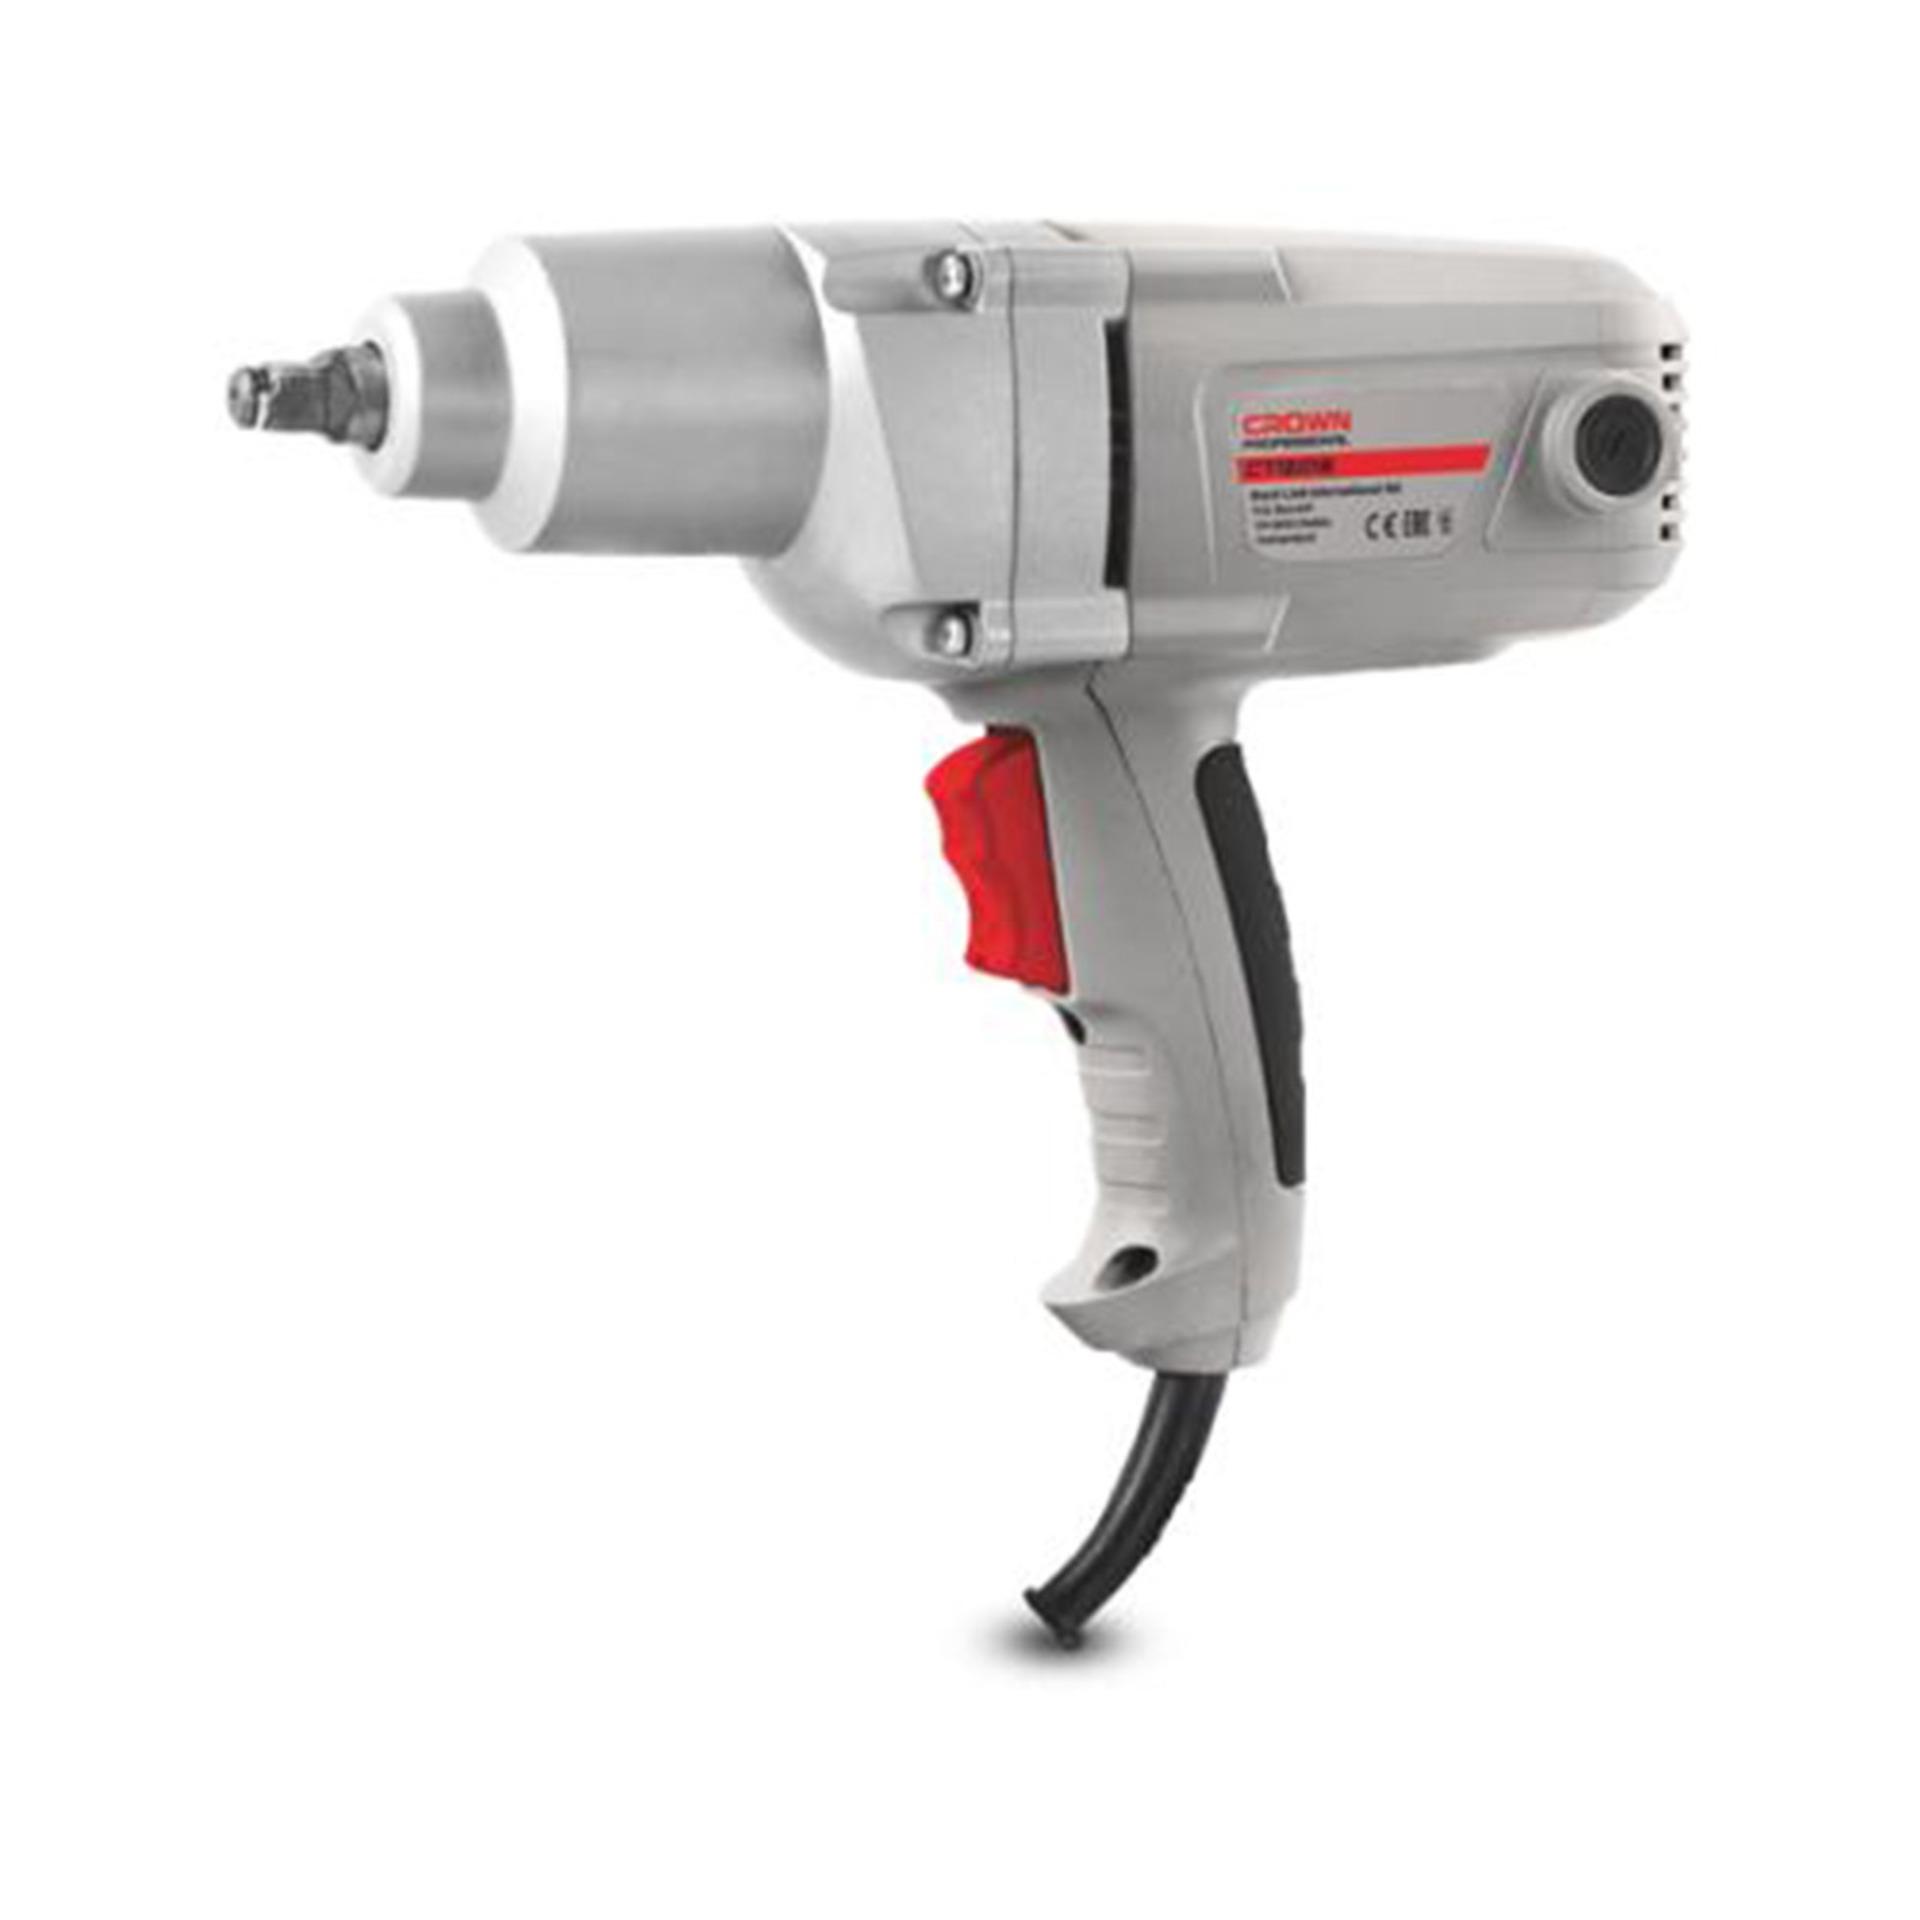 Crown Power Impact Wrench 900W 2100RPM CT12018